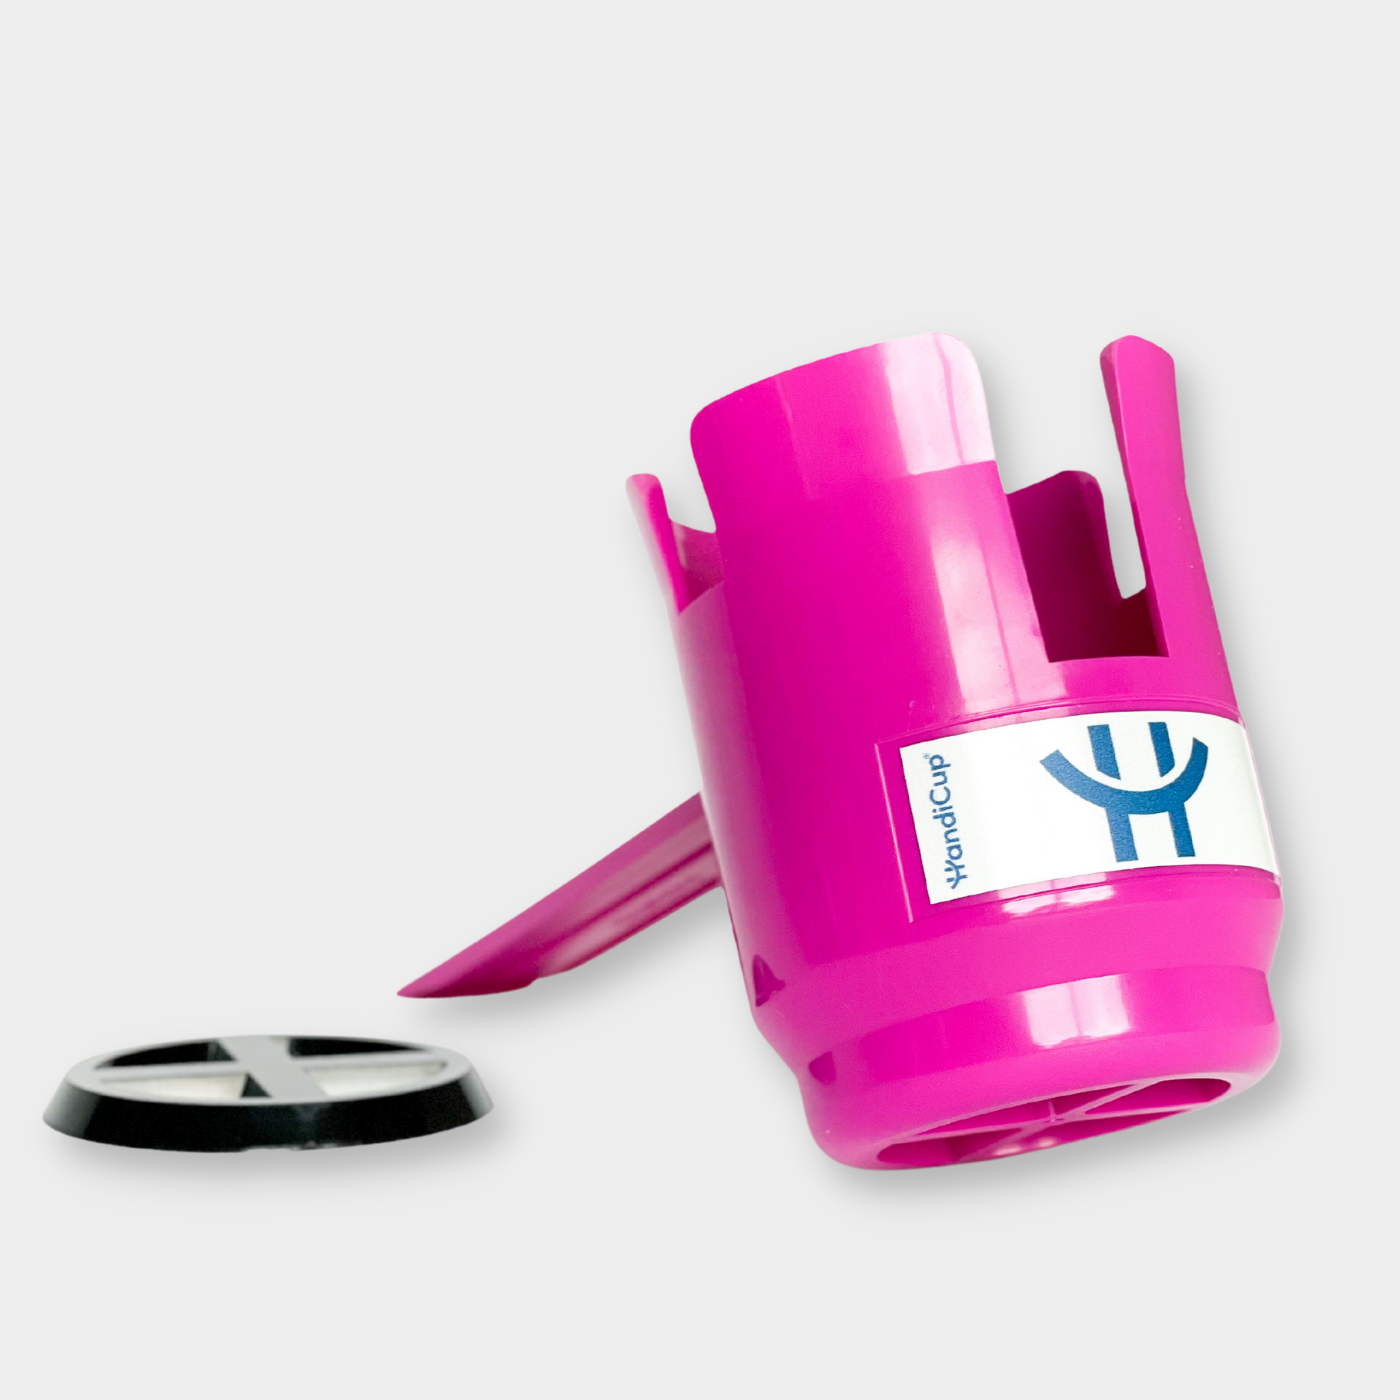 HandiCup is a wheelchair cup holder. slide under seat cushion. sized for travel mug or coffee mug.